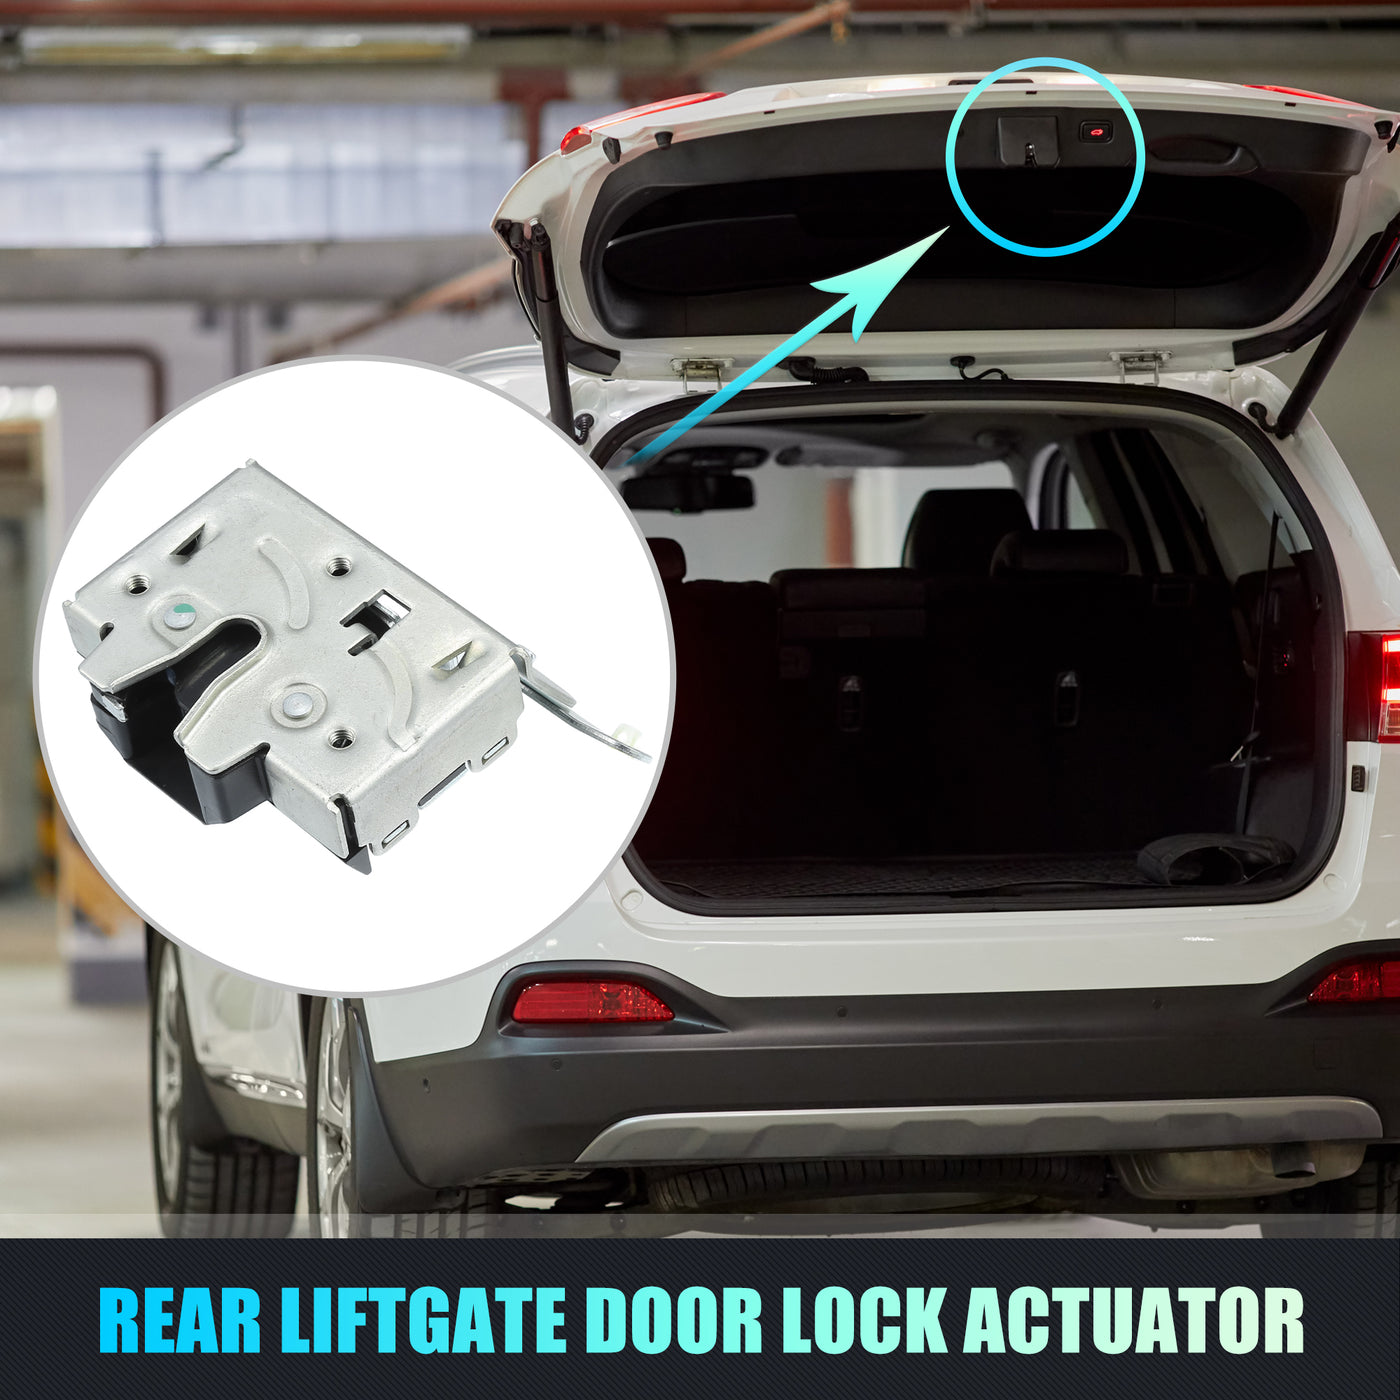 X AUTOHAUX Replacement Rear Liftgate Door Lock Actuator for Mercury Sable 2001-2005 for Ford Taurus 2001-2007 Tailgate Latch Assembly No.YF1Z7443150AA Silver Tone